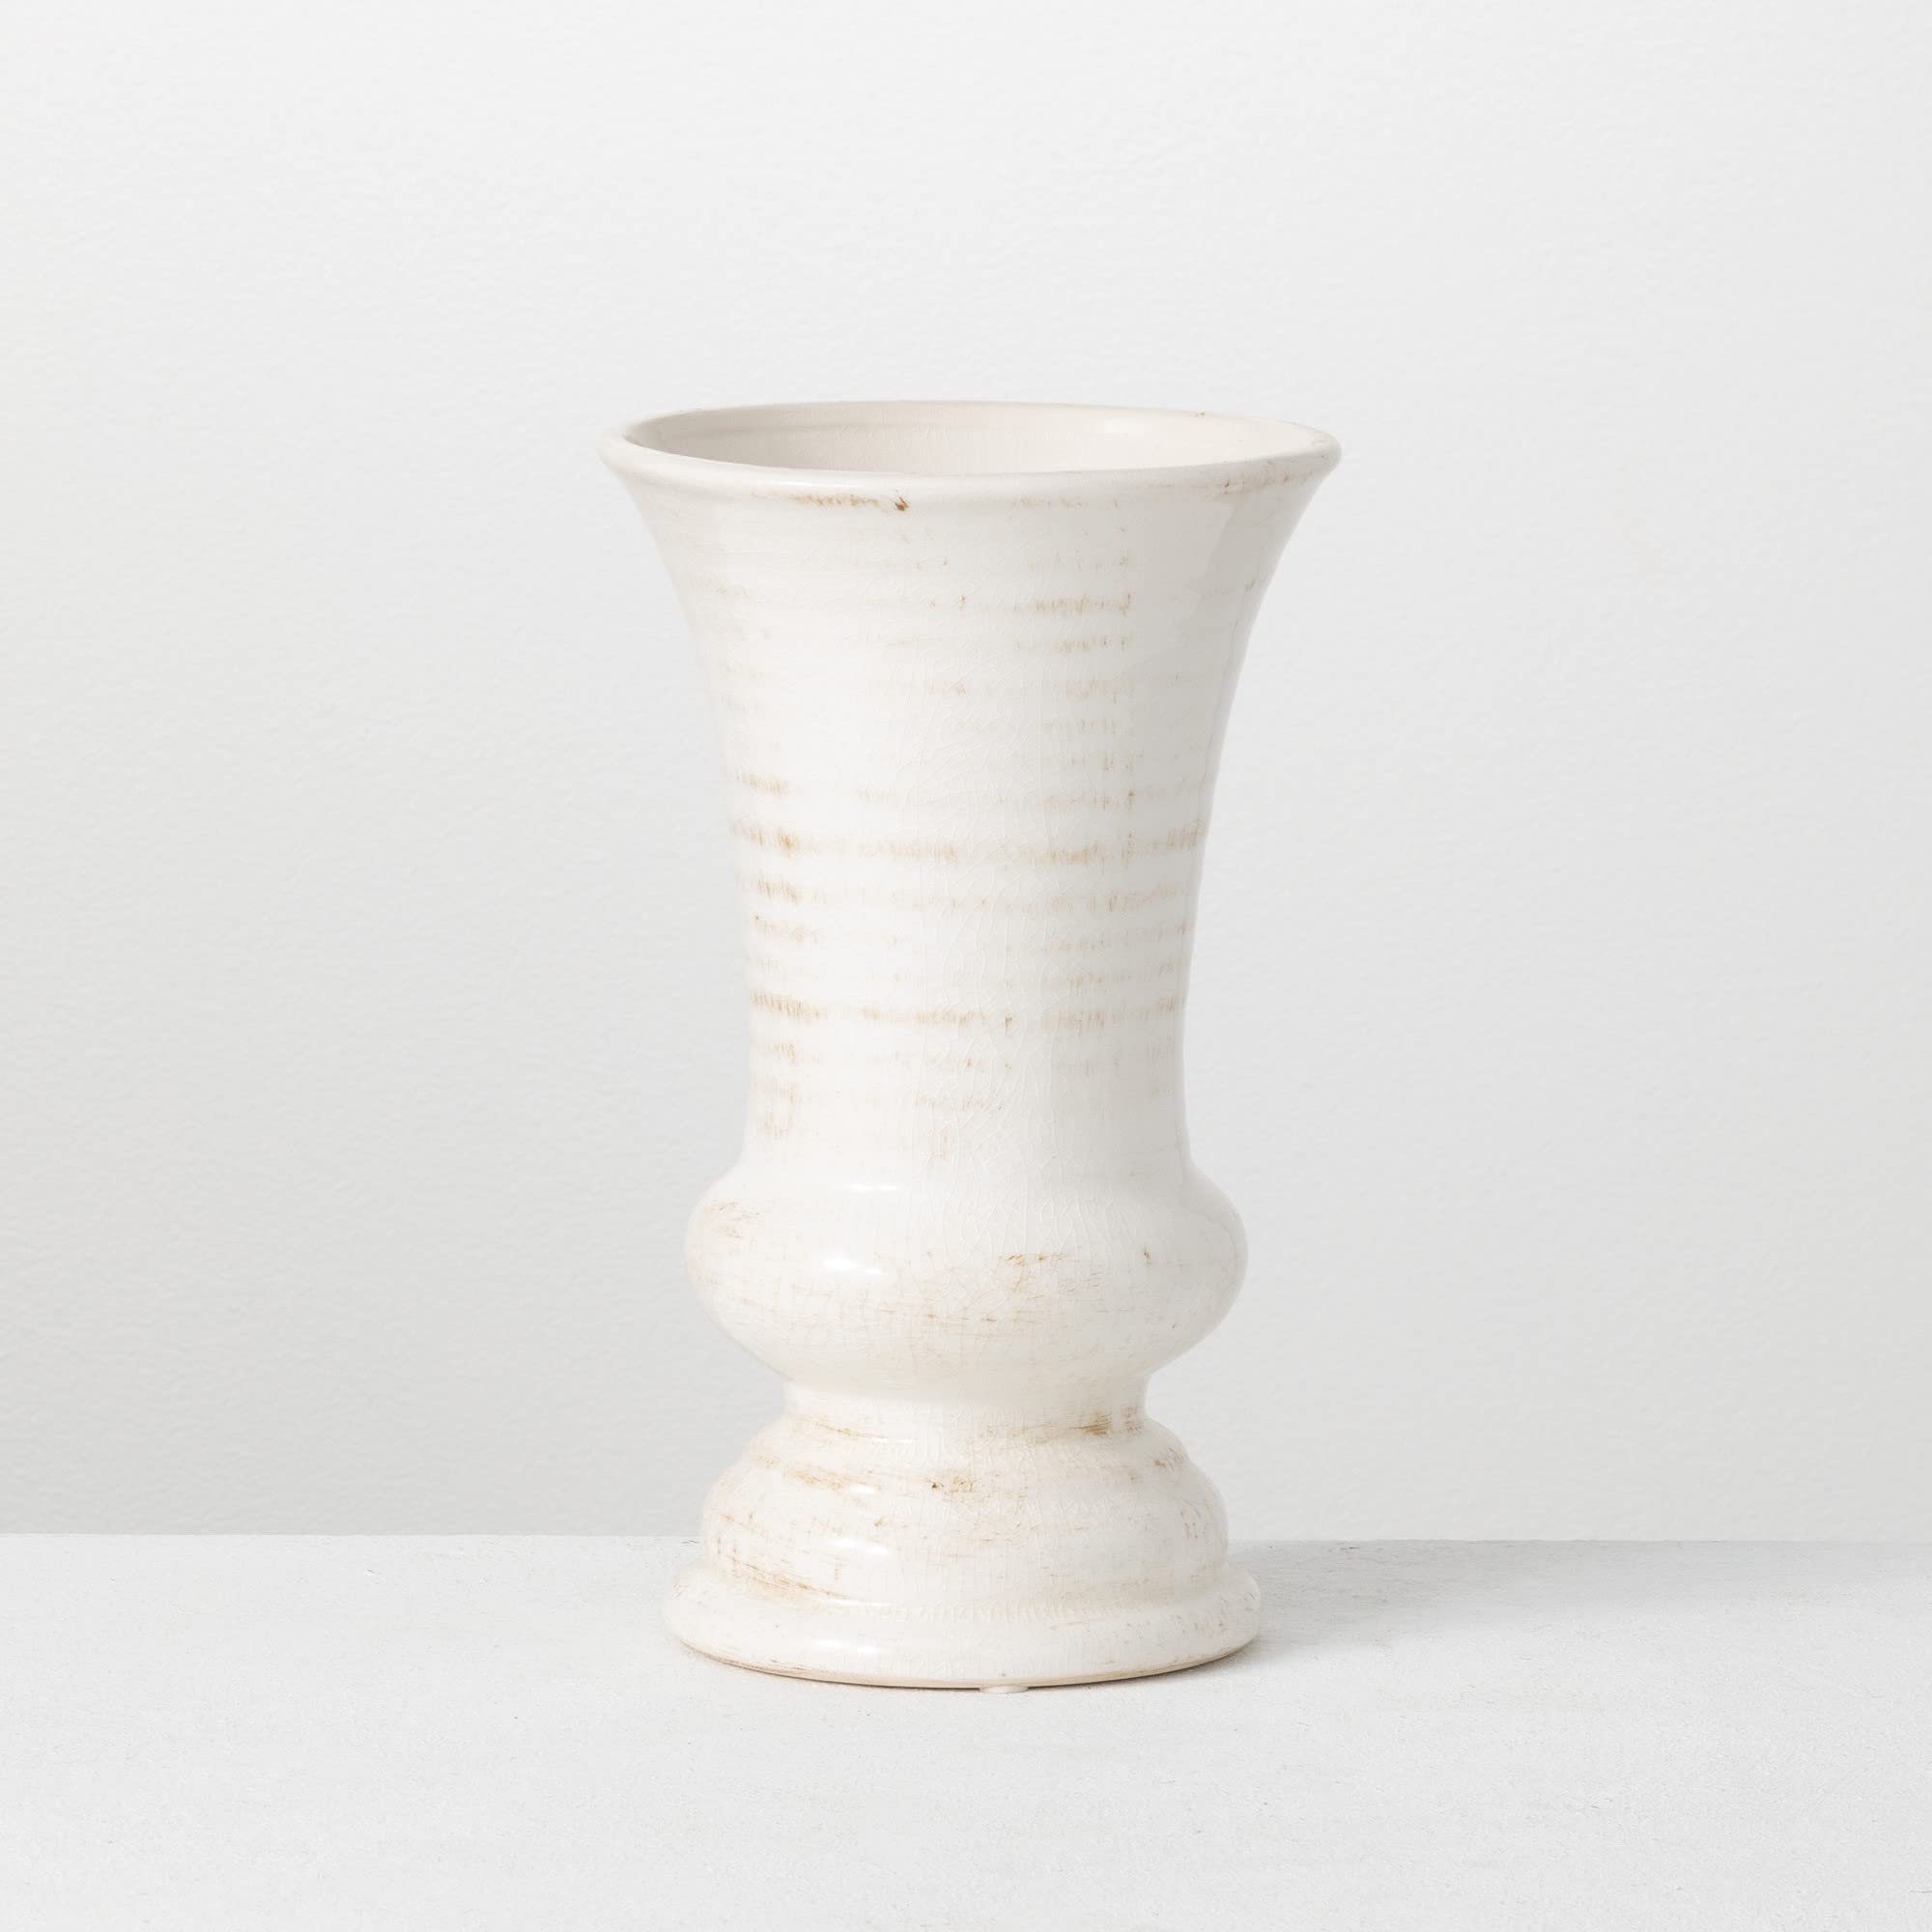 Sullivans Modern Farmhouse Decorative Ceramic Vase, 6 x 6 x 10 inches, Distressed Decoration for Farmhouse Décor, Off-White Crackled Finish, Faux Floral Vase, Table Décor for Dining or Living Room